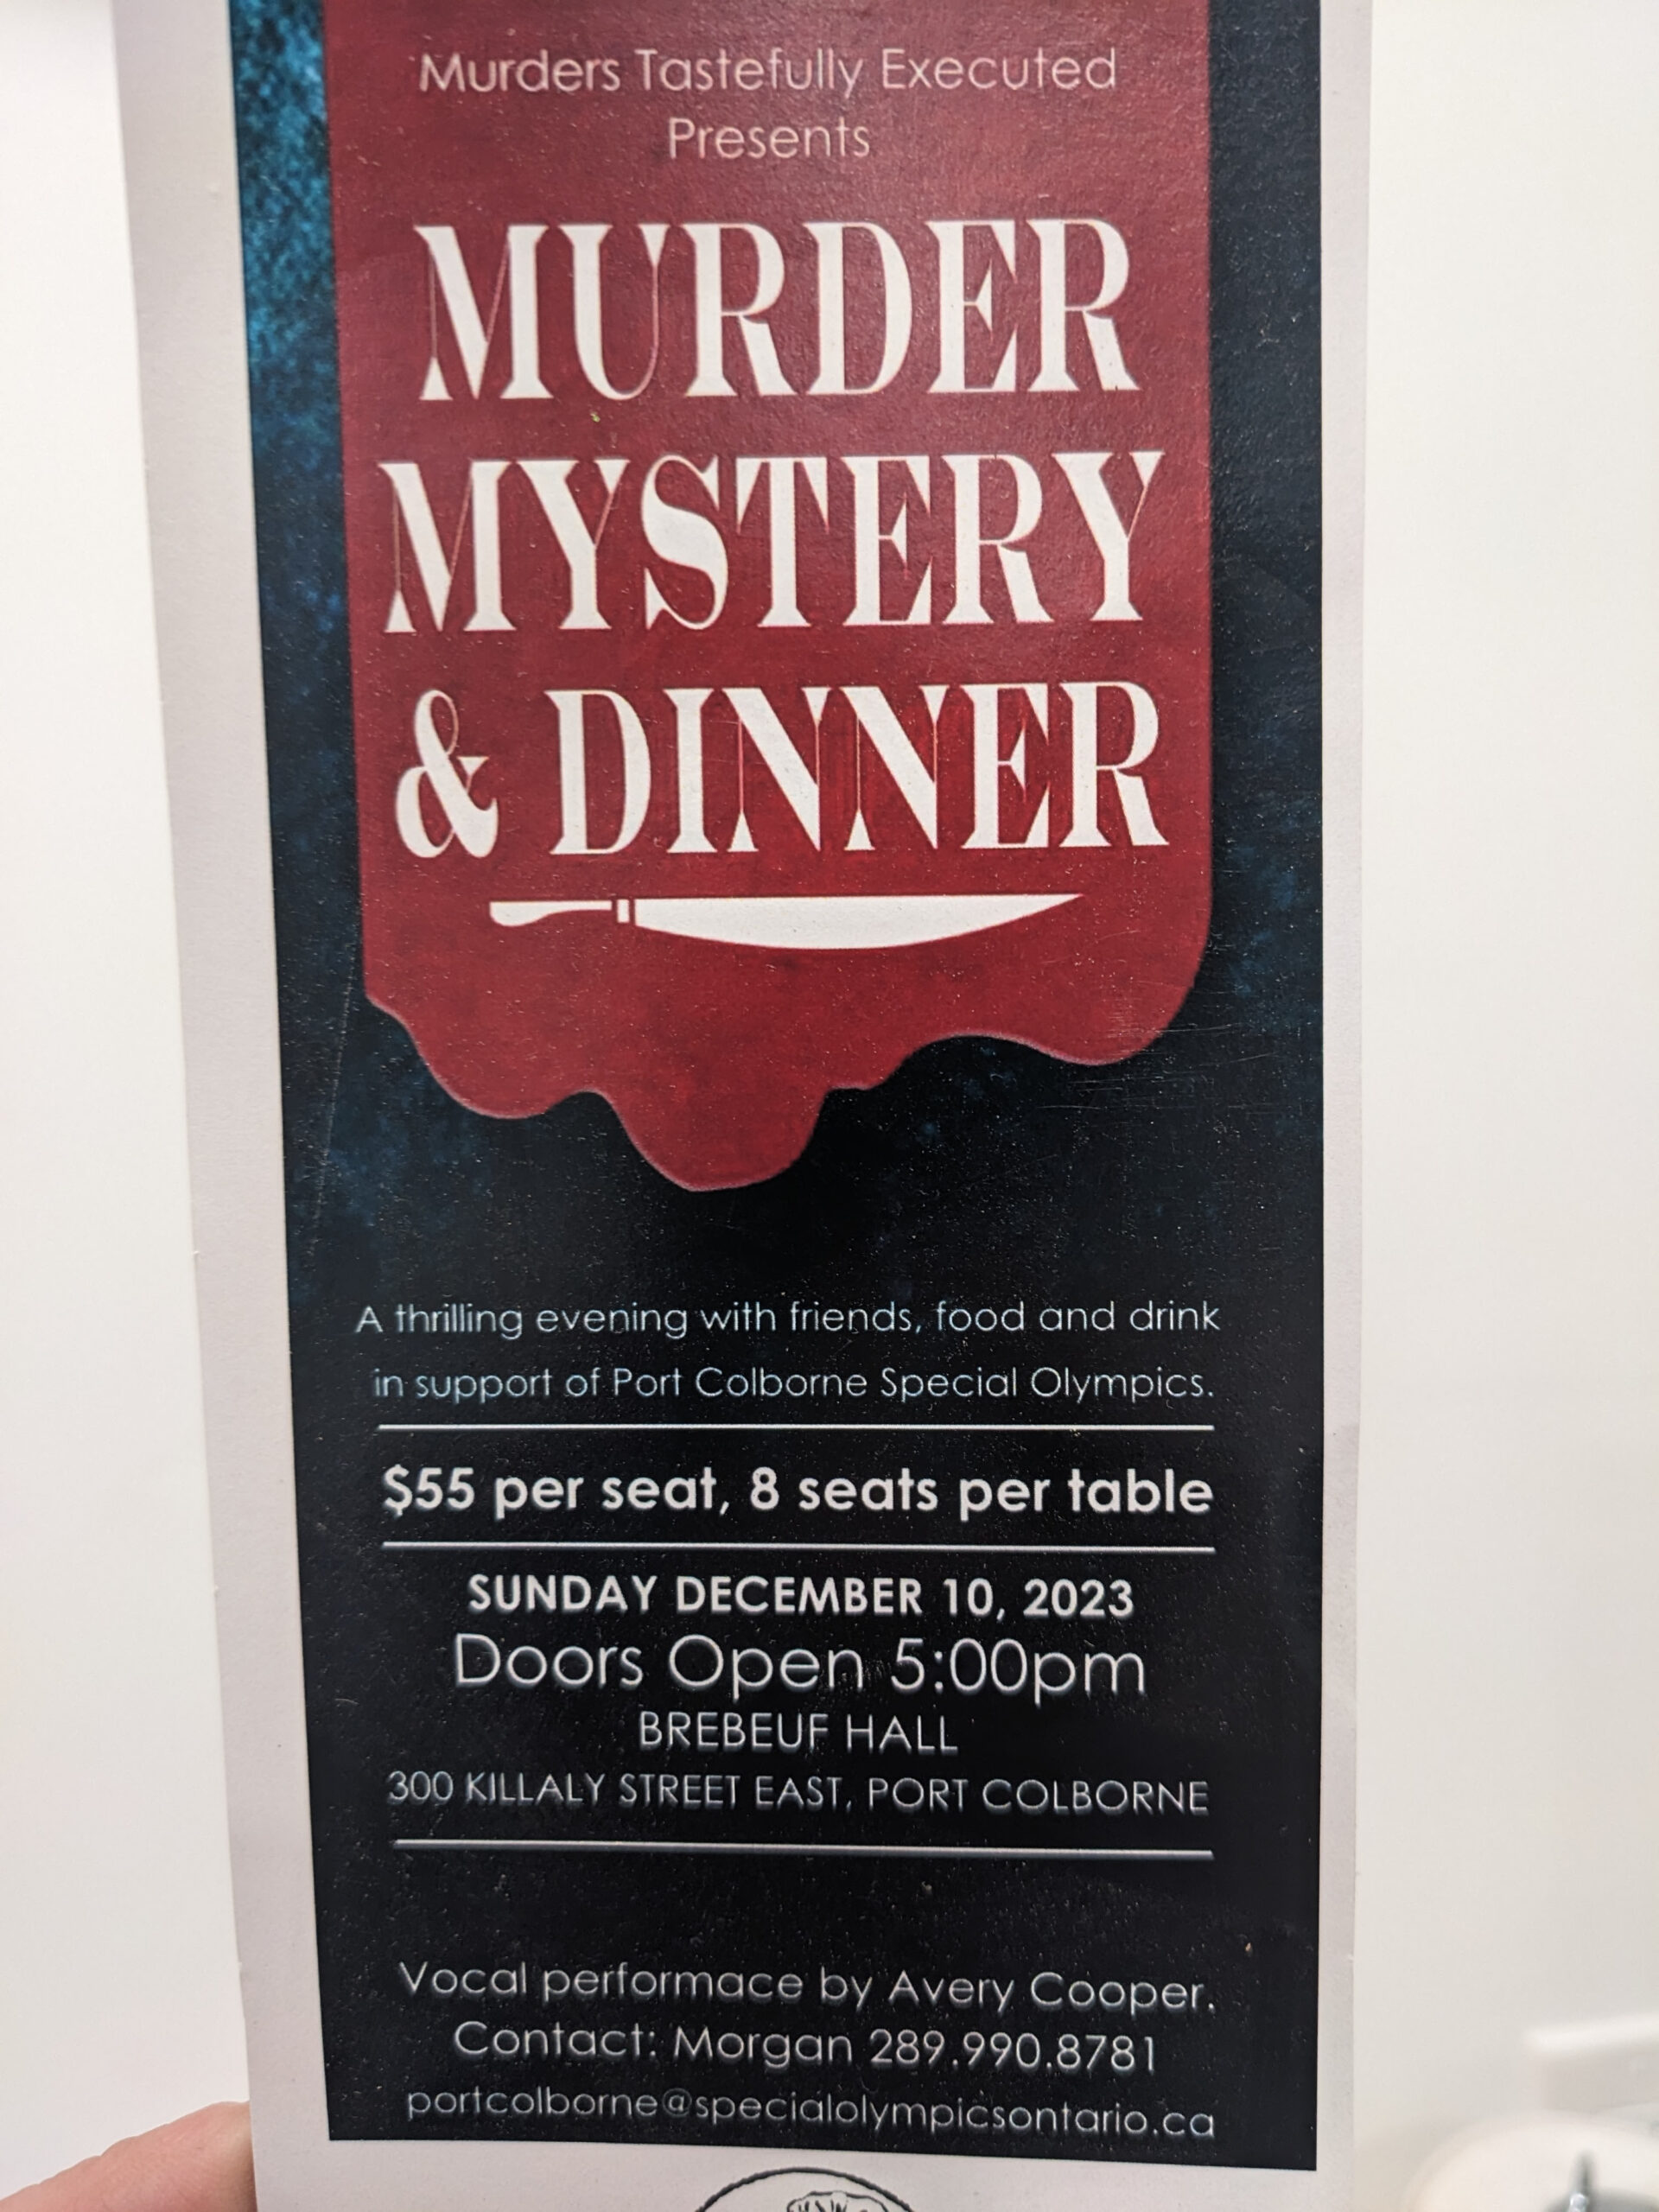 Tickets on Sale! Murder Mystery & Dinner in Support of Port Colborne Special Olympics